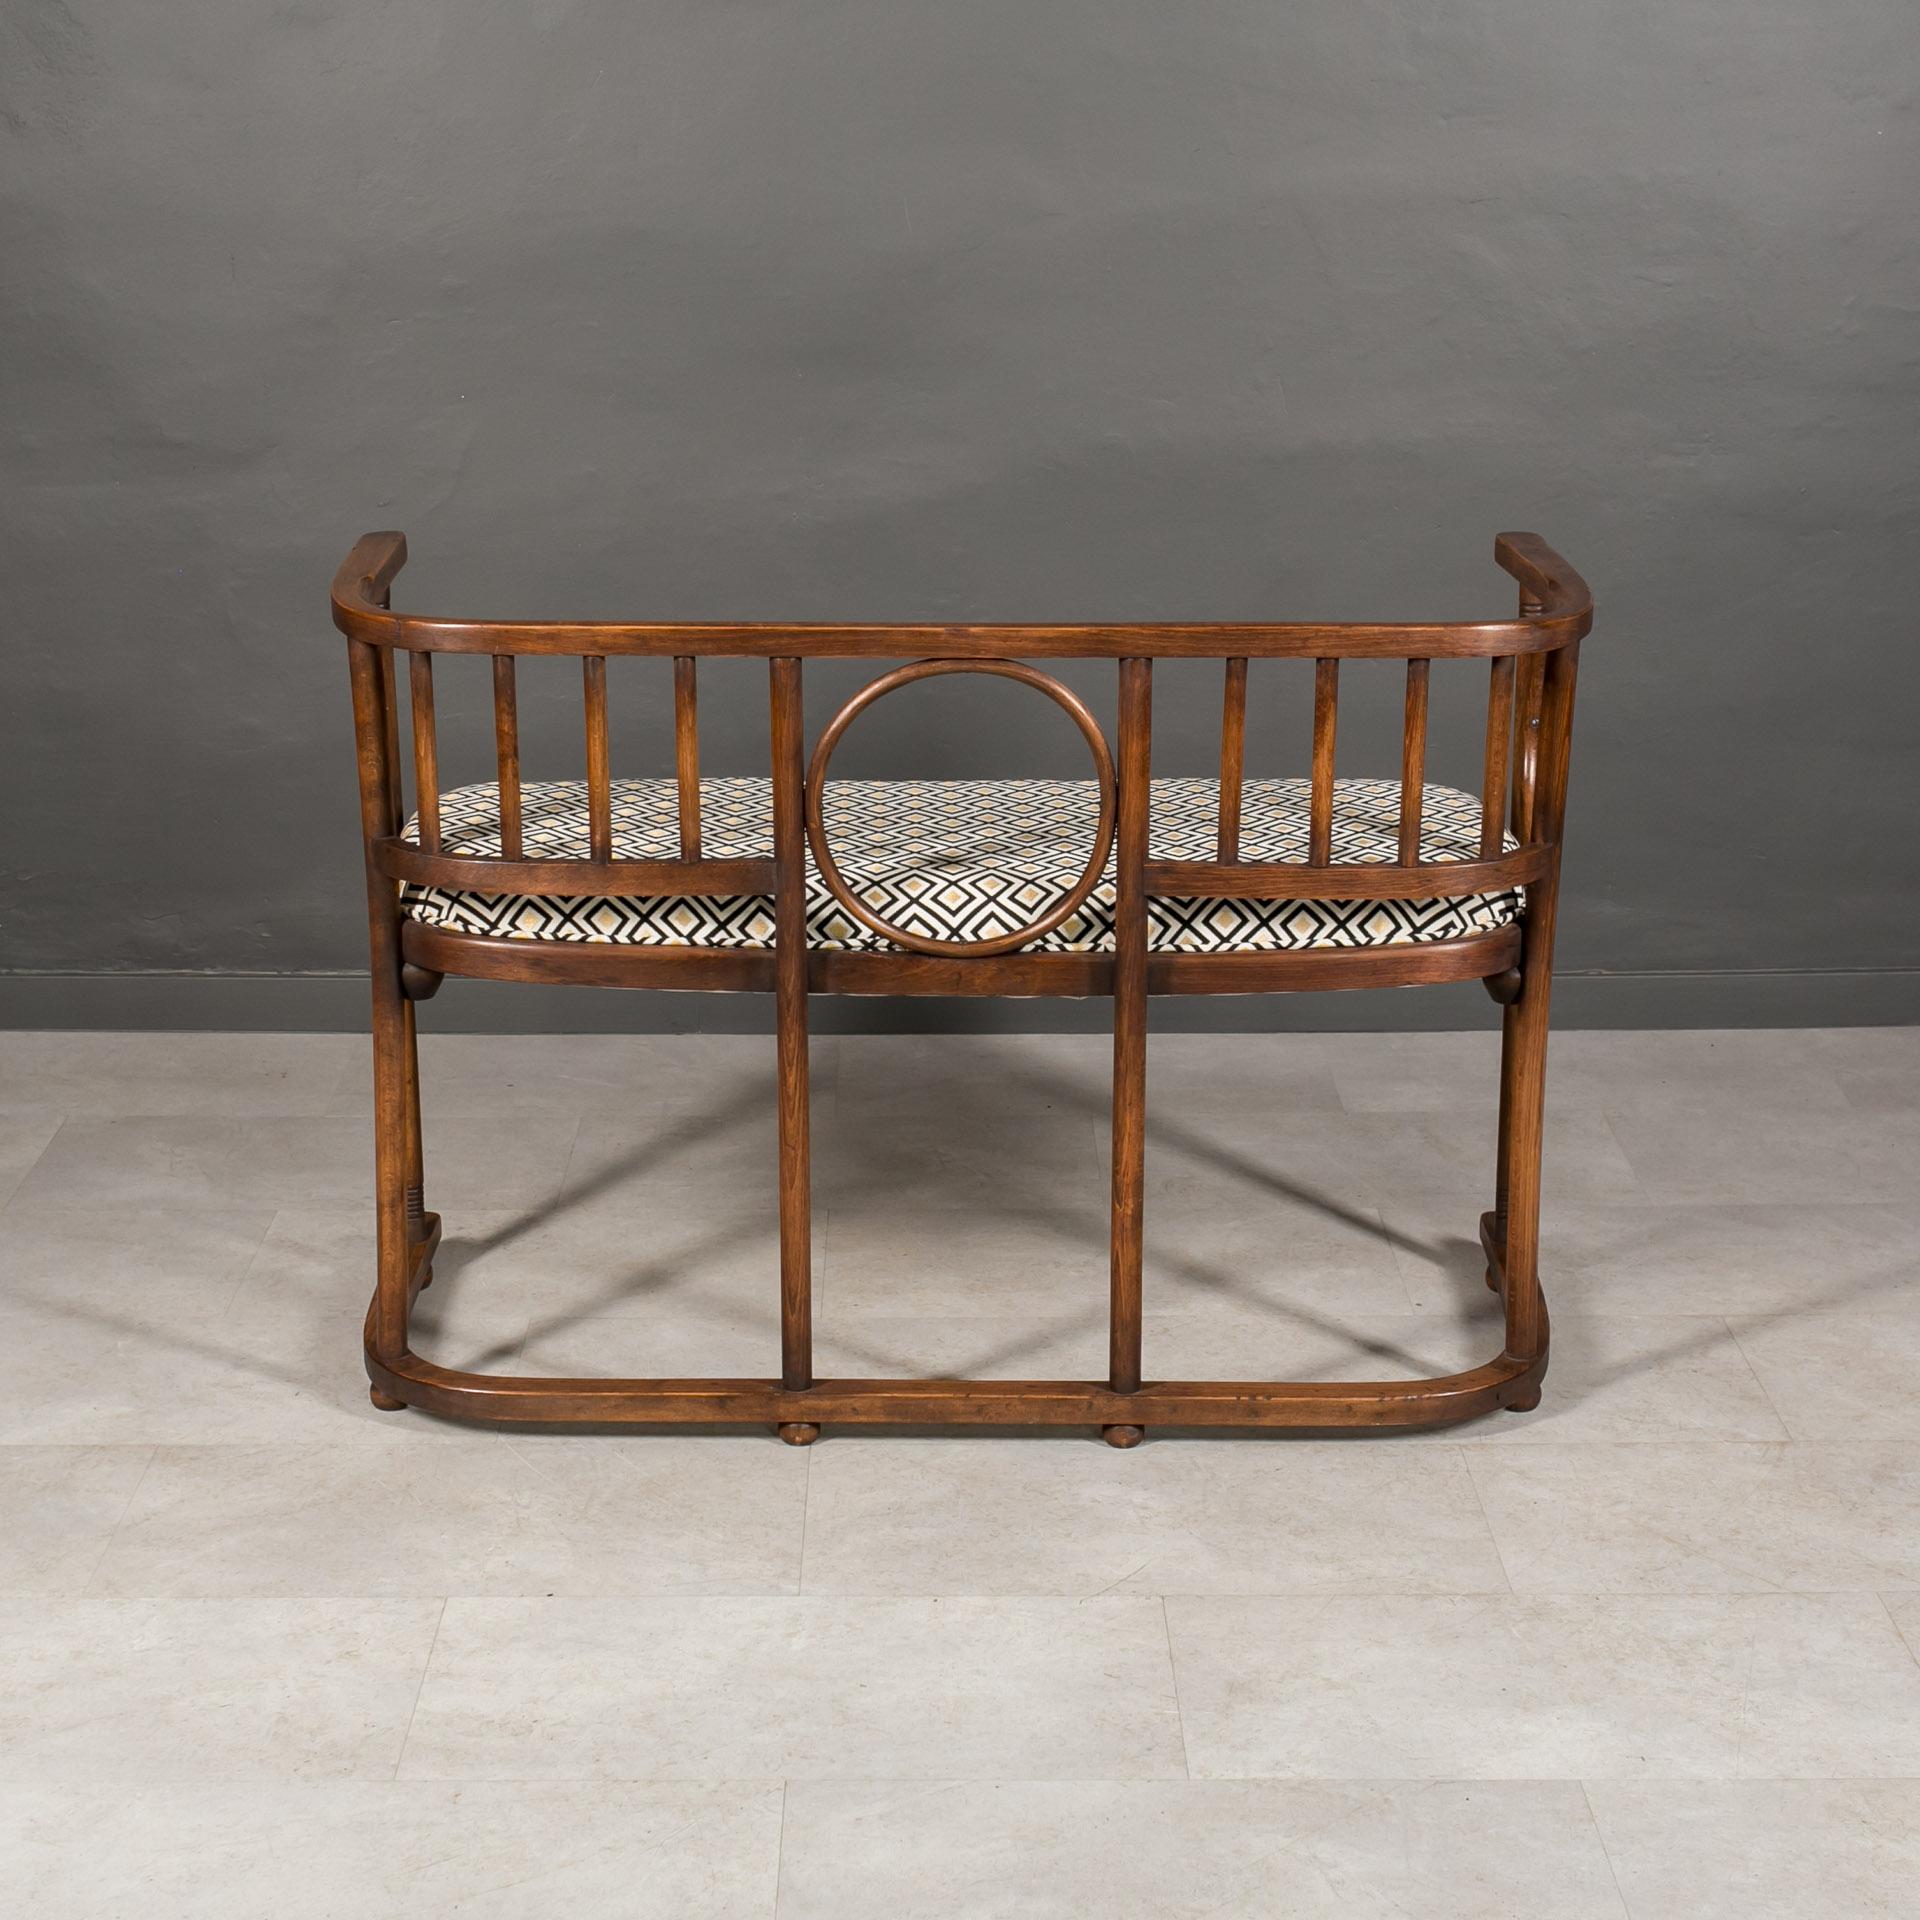 Oiled Early 20th Century Bentwood Bench Settee by J. Hoffmann for Thonet - Mundus